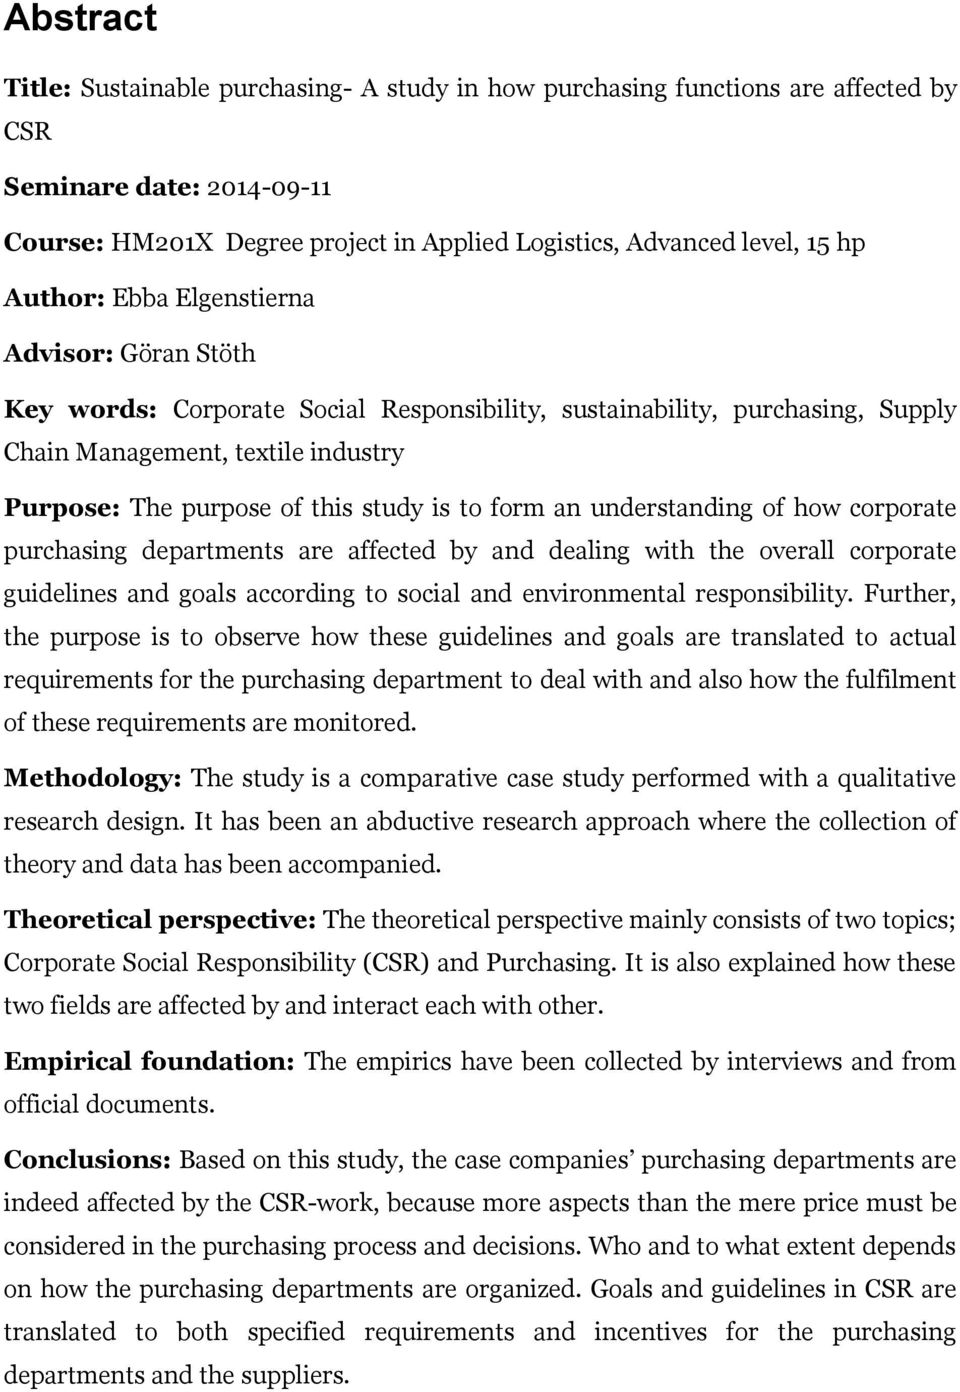 to form an understanding of how corporate purchasing departments are affected by and dealing with the overall corporate guidelines and goals according to social and environmental responsibility.